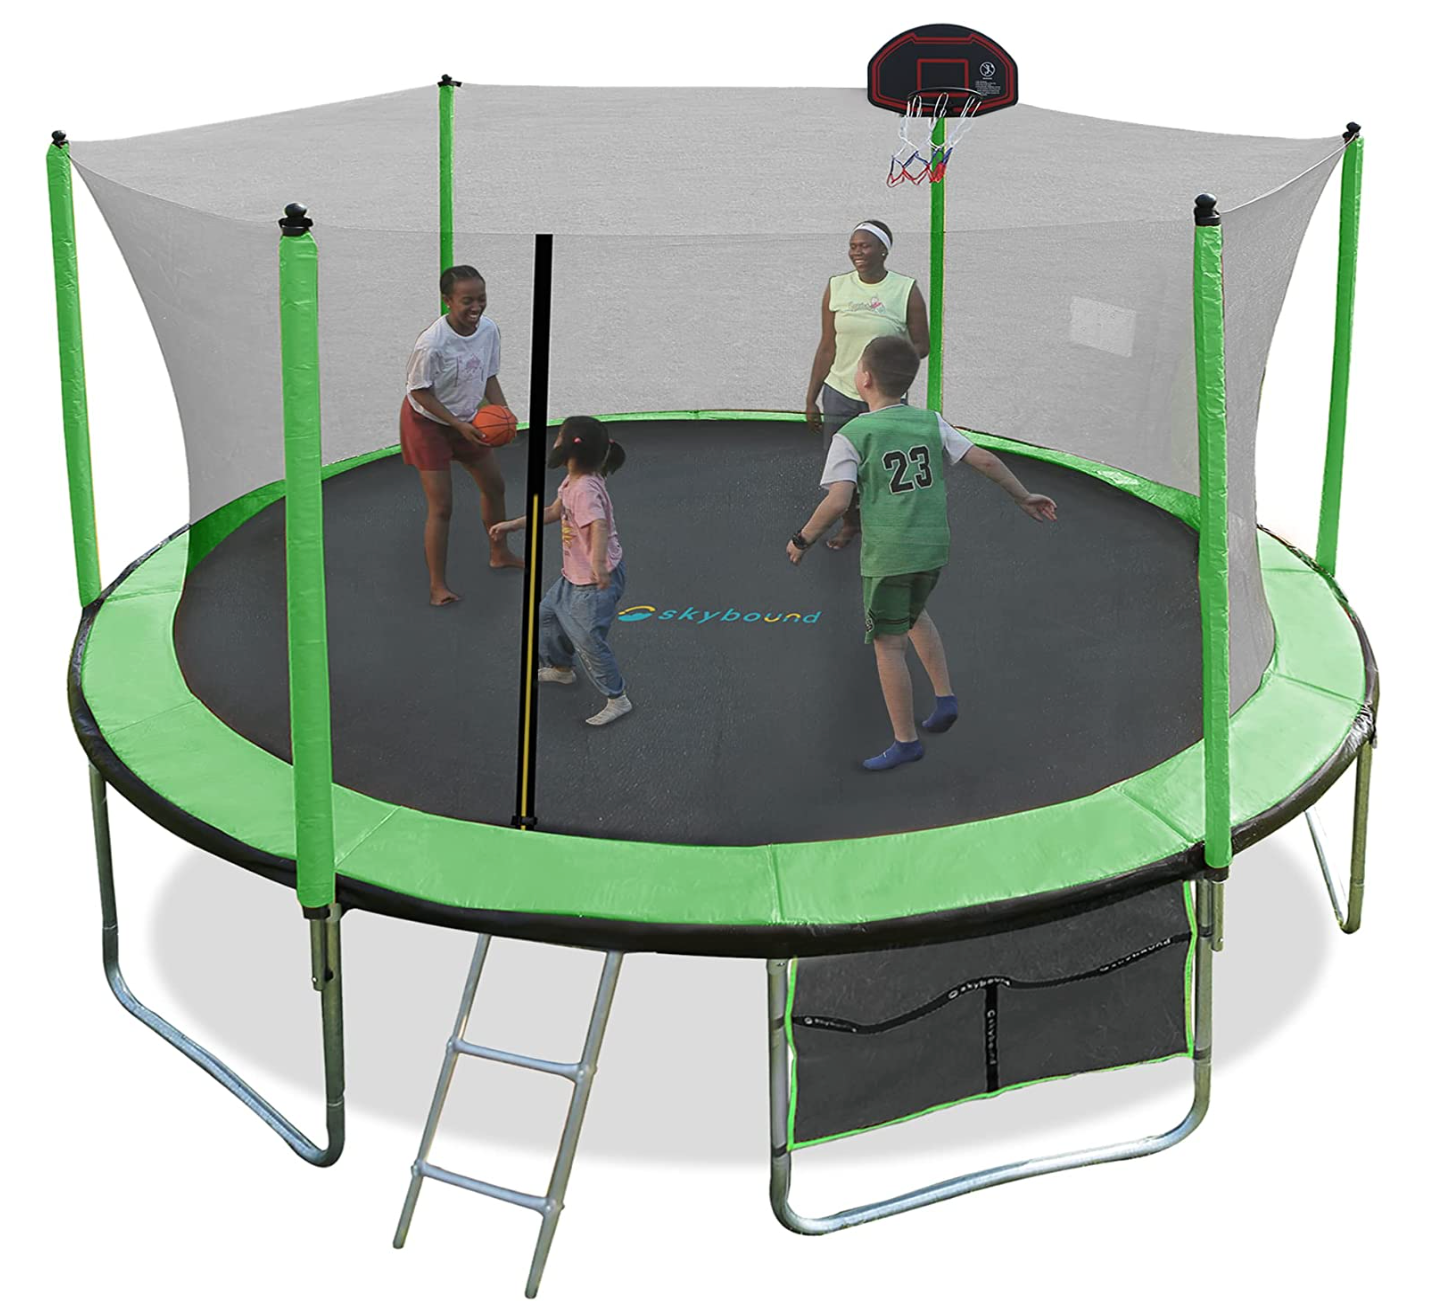 An adult and three children playing basketball on a trampoline